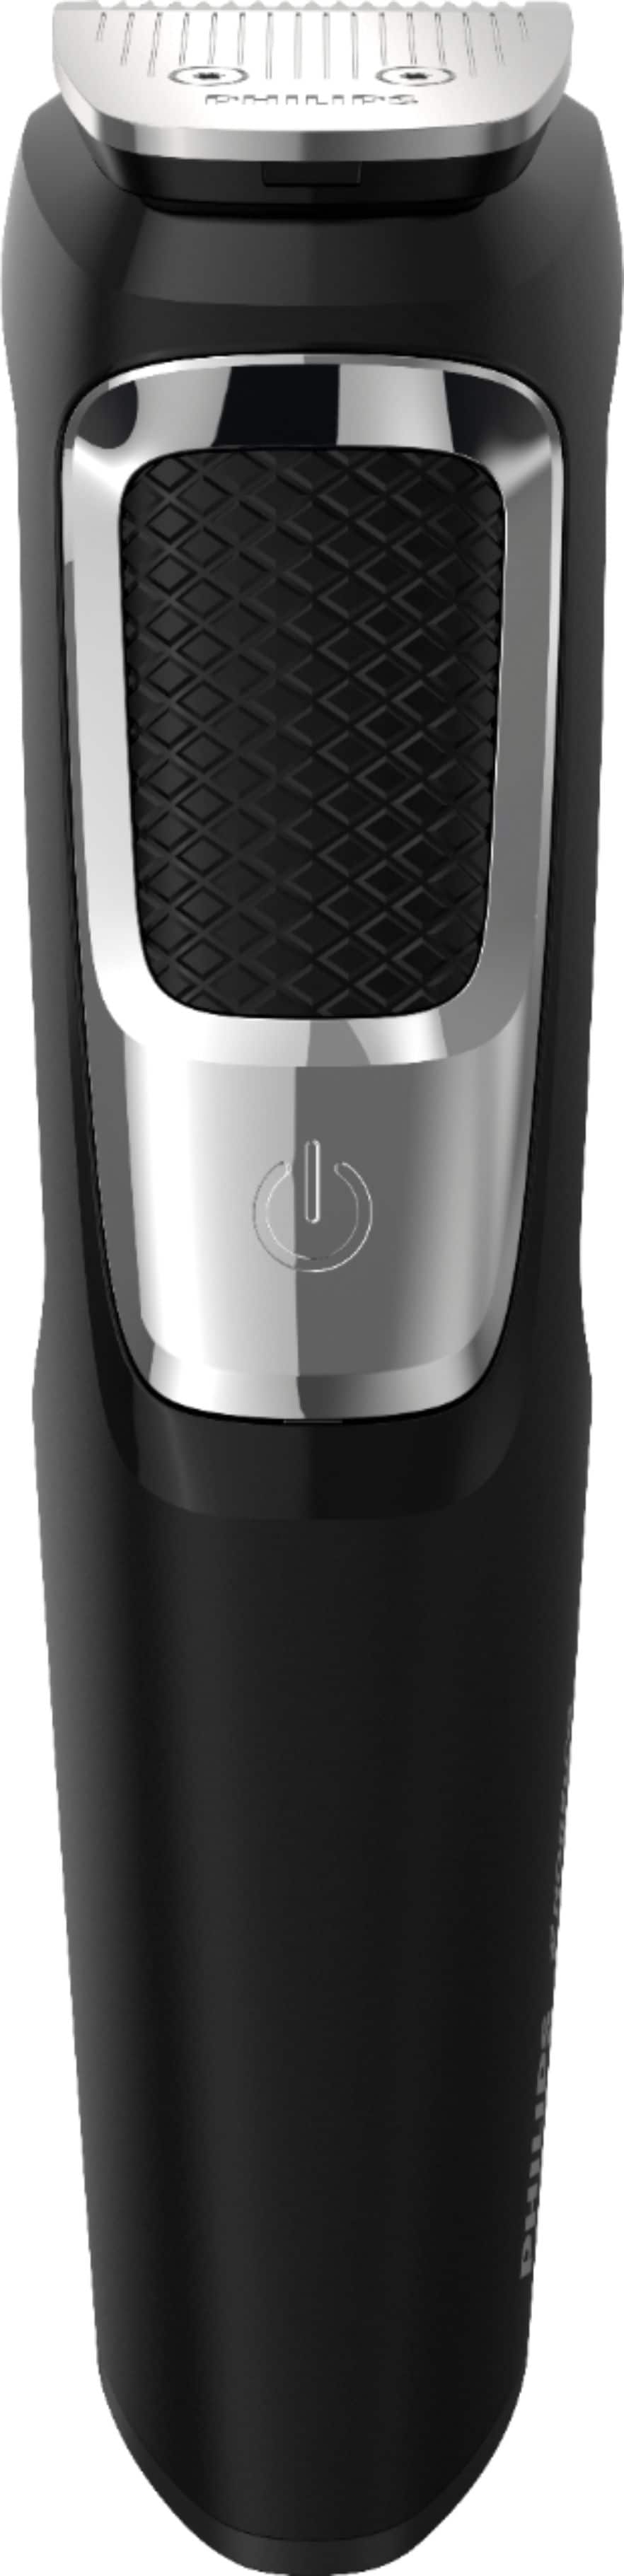 Philips Norelco - Multigroom 3000 Beard, Moustache, Ear and Nose Trimmer - Black/silver_0